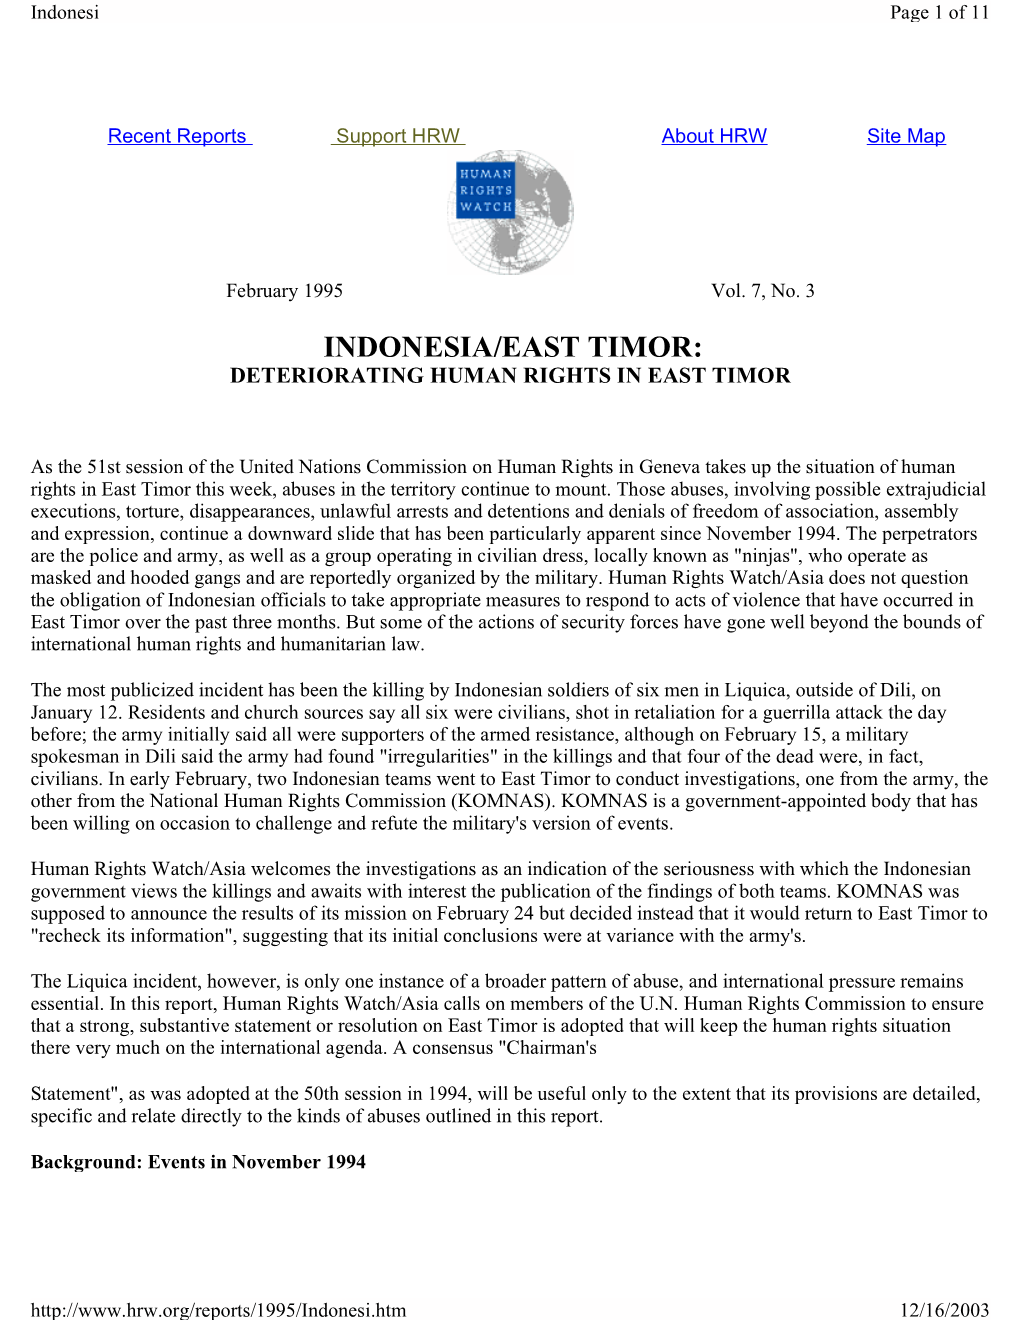 Indonesia/East Timor: Deteriorating Human Rights in East Timor